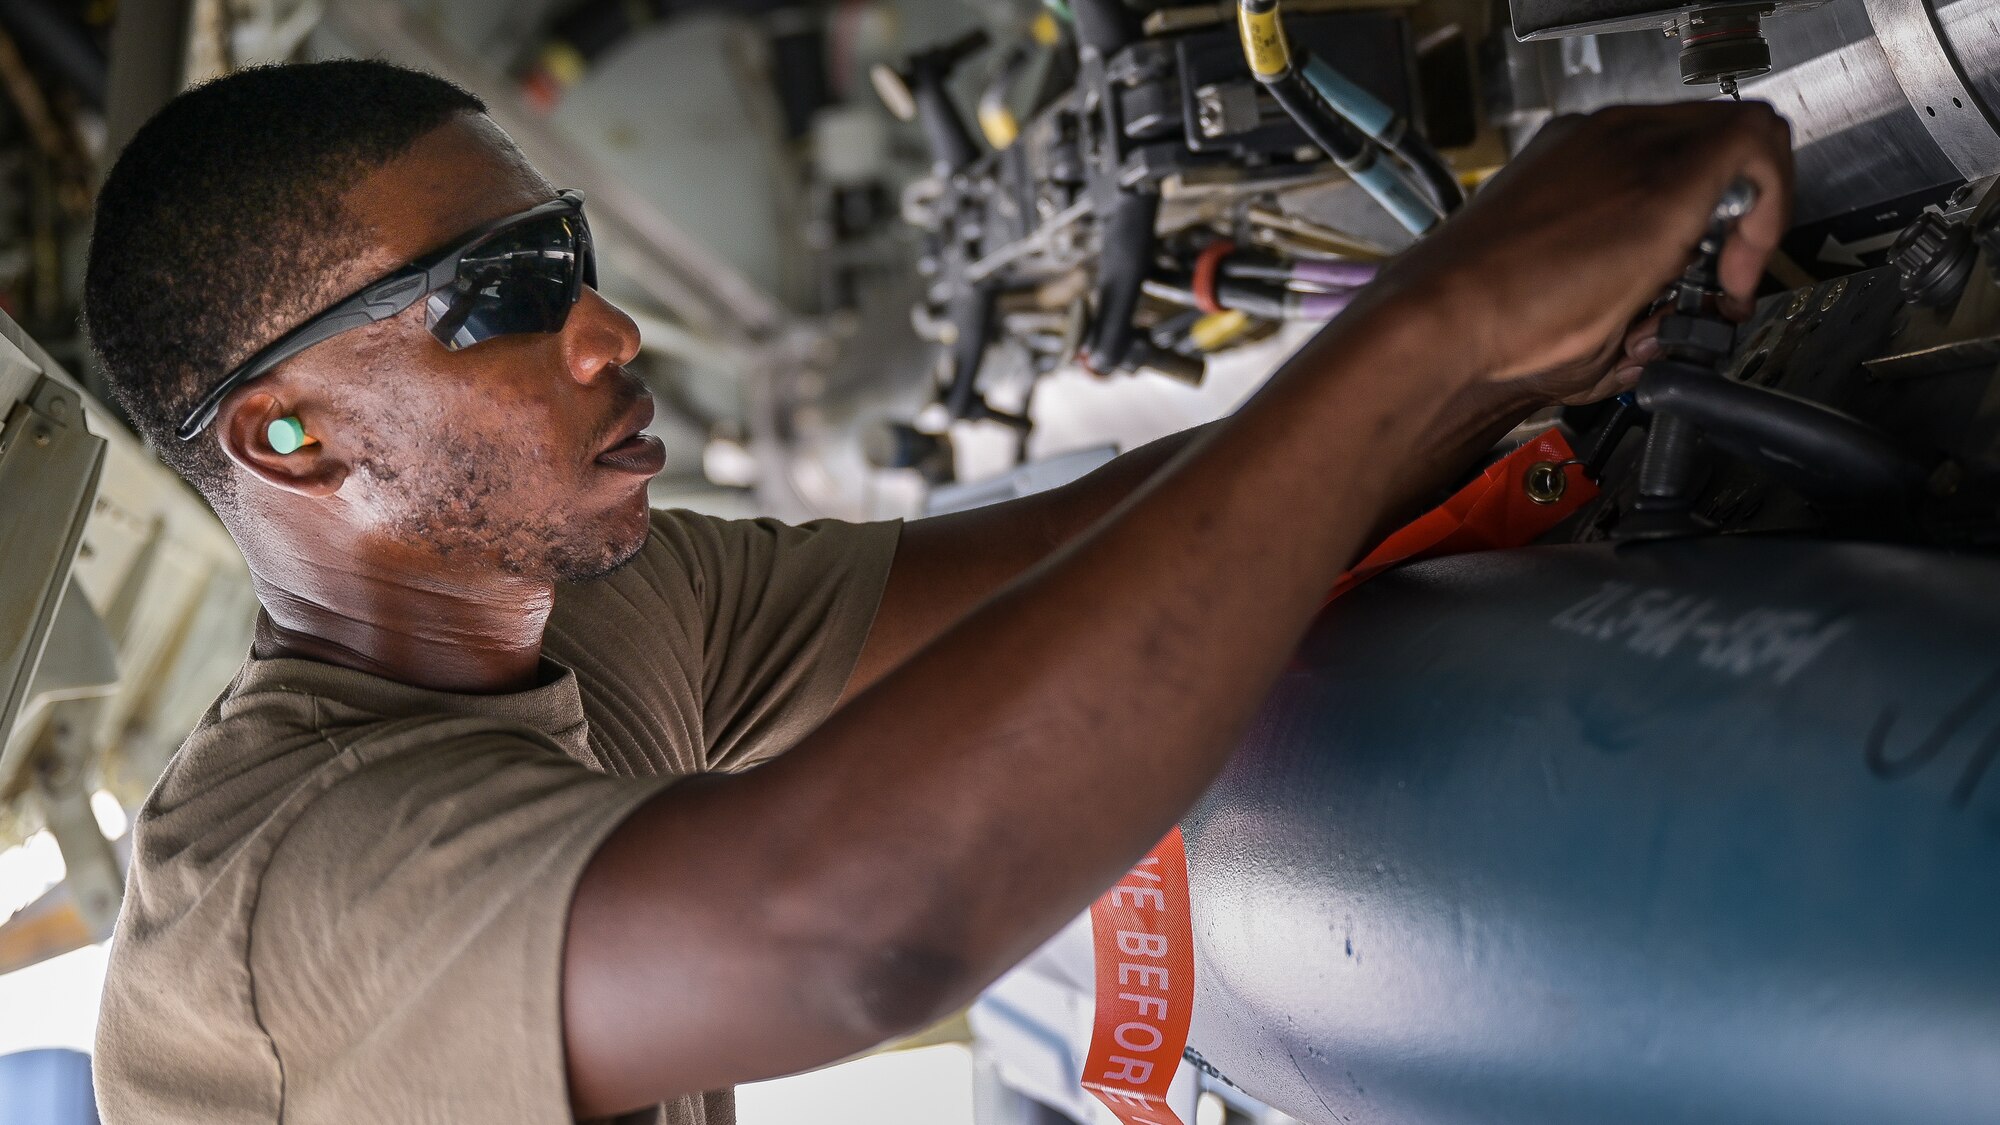 Staff Sgt. Schnathan Johnson, 96th Aircraft Maintenance Unit weapons load team chief, tightens a bolt of a GBU-12 munition during Combat Hammer at Barksdale Air Force Base, Louisiana, June 7, 2022. Combat Hammer was an exercise that encompassed end-to-end evaluations from units across the wing, assessing proficiency across the board. (U.S. Air Force photo by Senior Airman Jonathan E. Ramos)